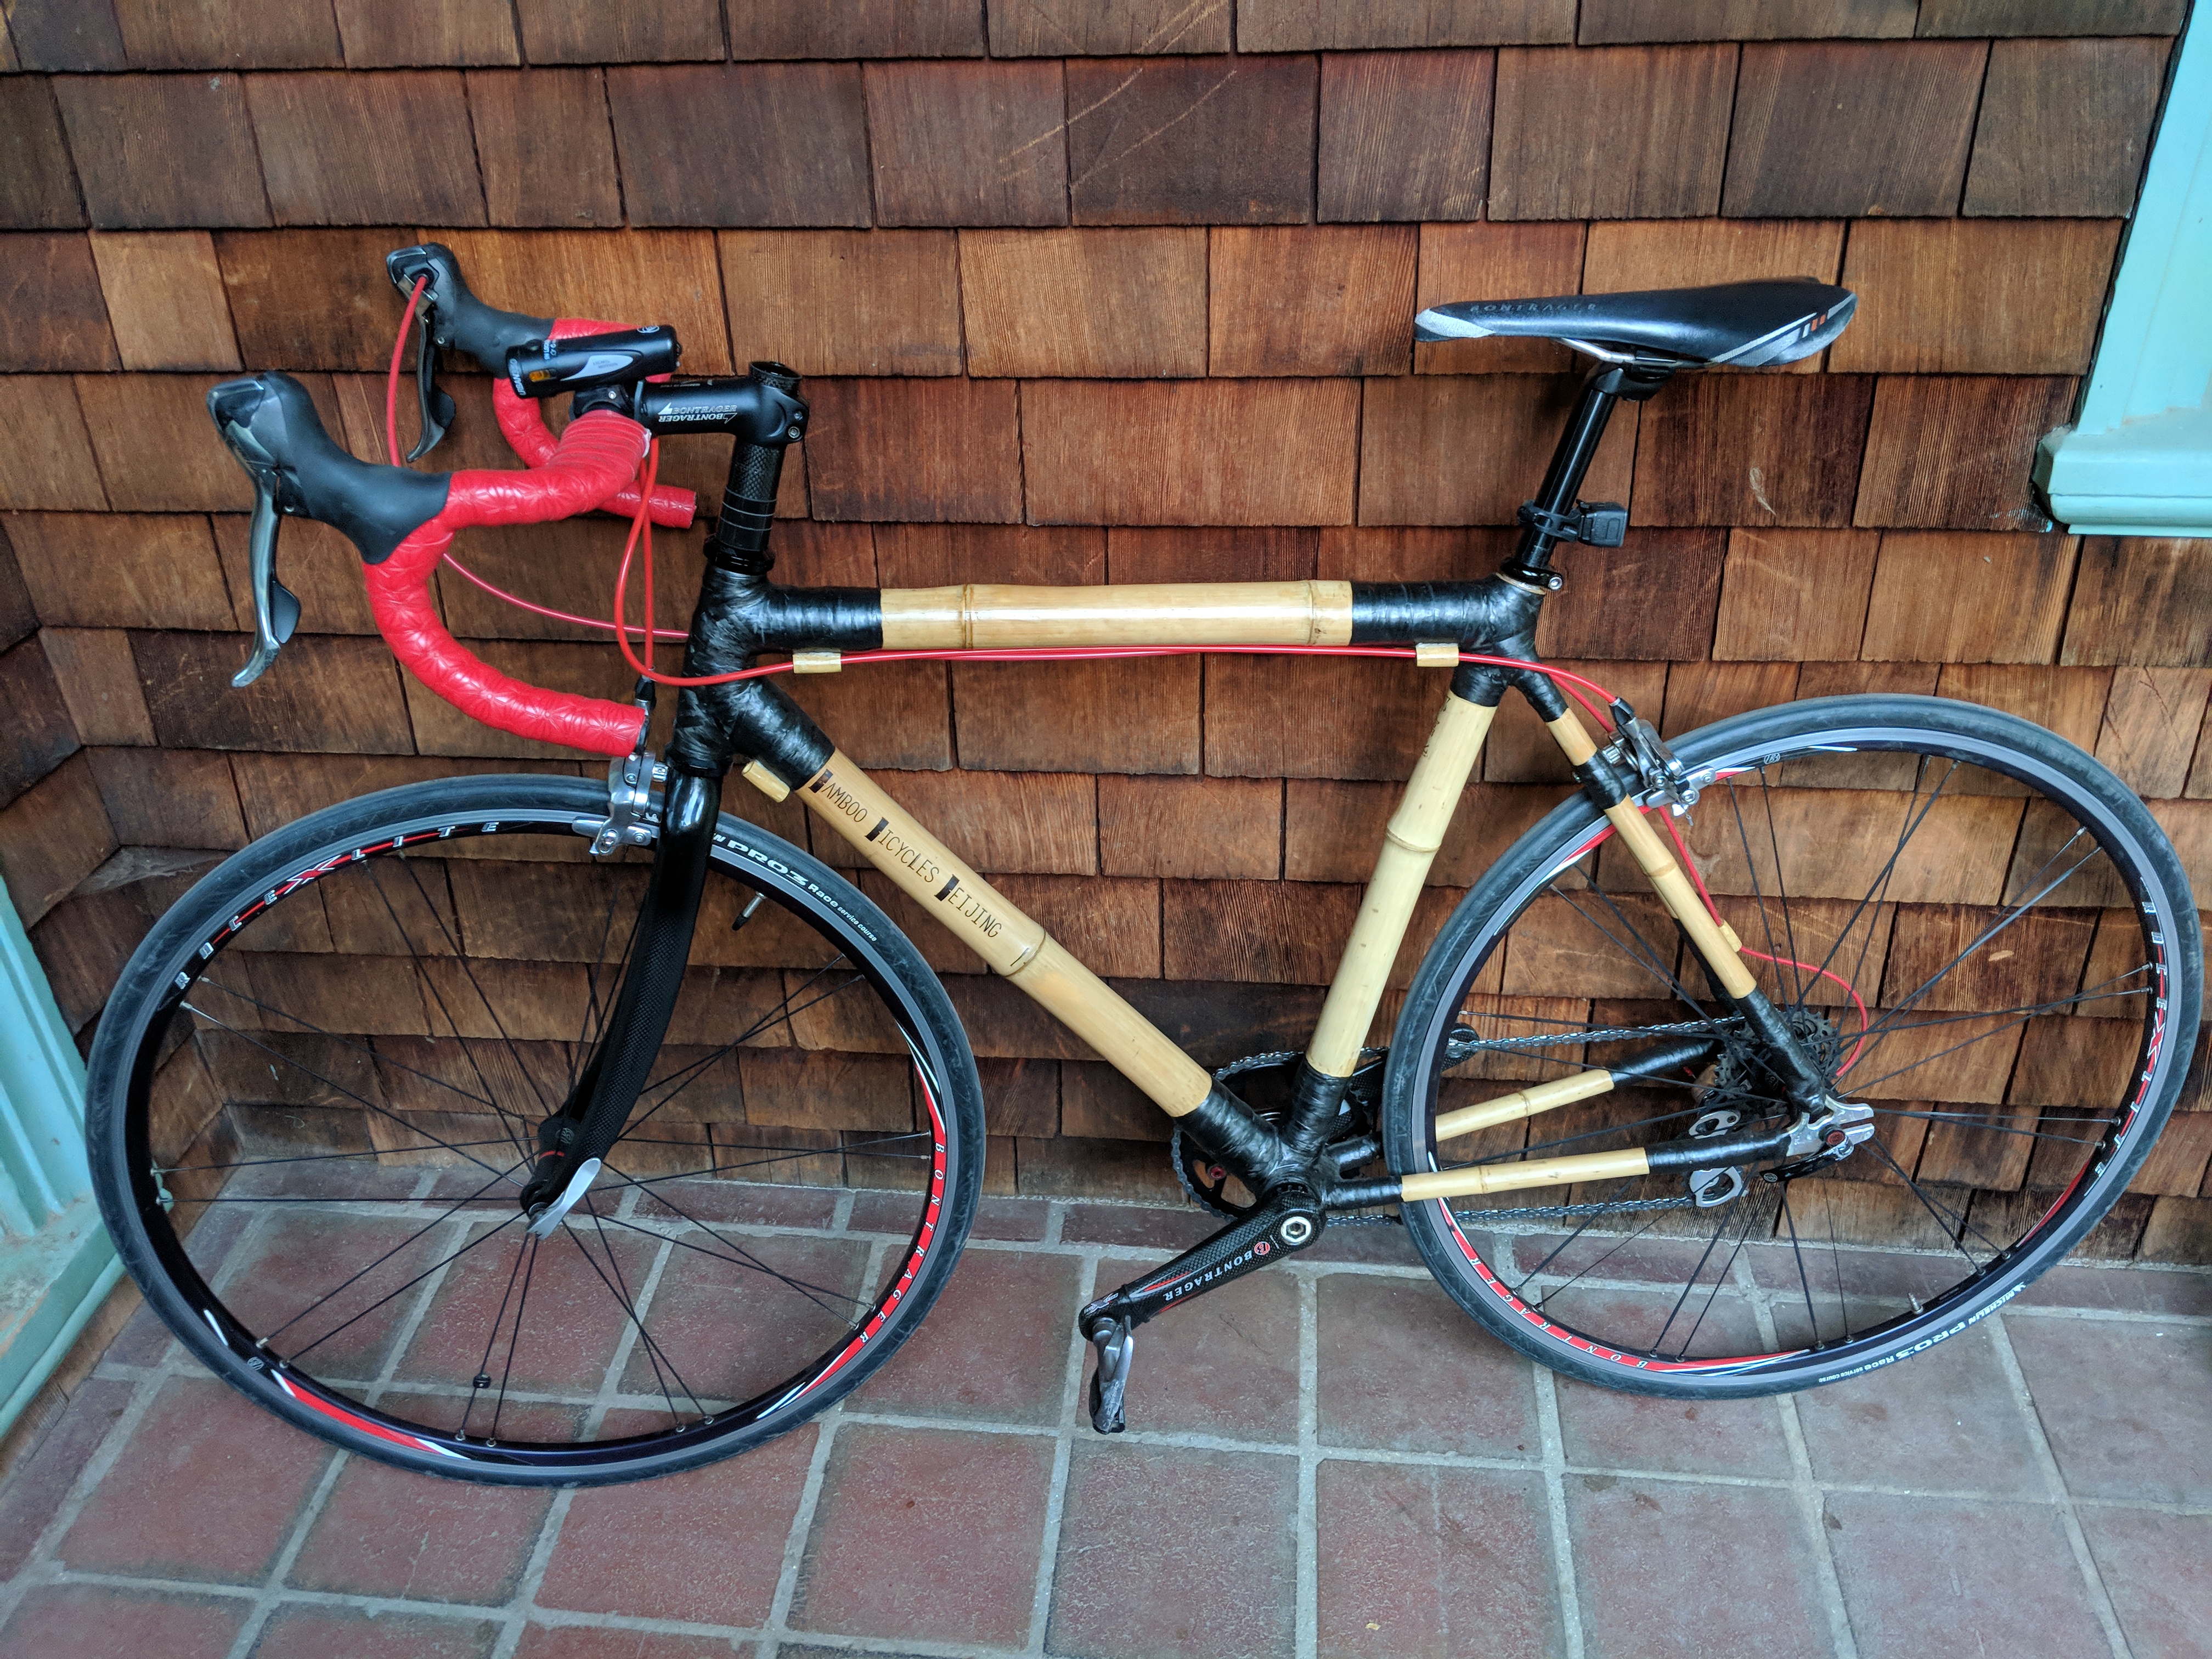 How to Build a Bamboo Bike from Scratch